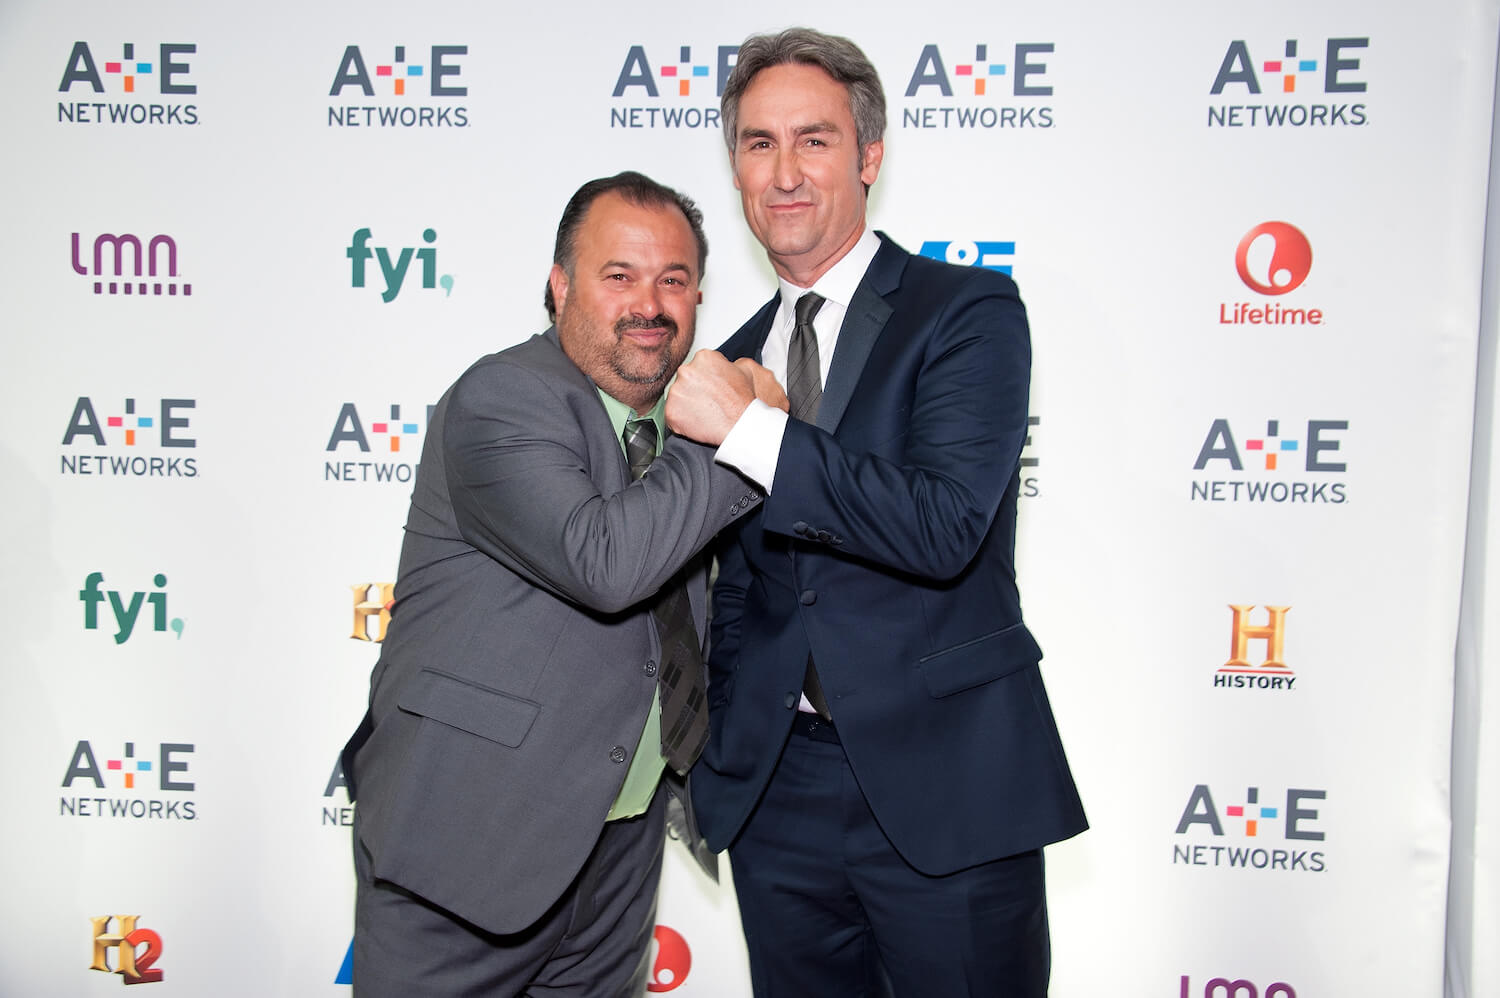 Frank Fritz and Mike Wolfe from 'American Pickers' wearing suits and smiling at an event